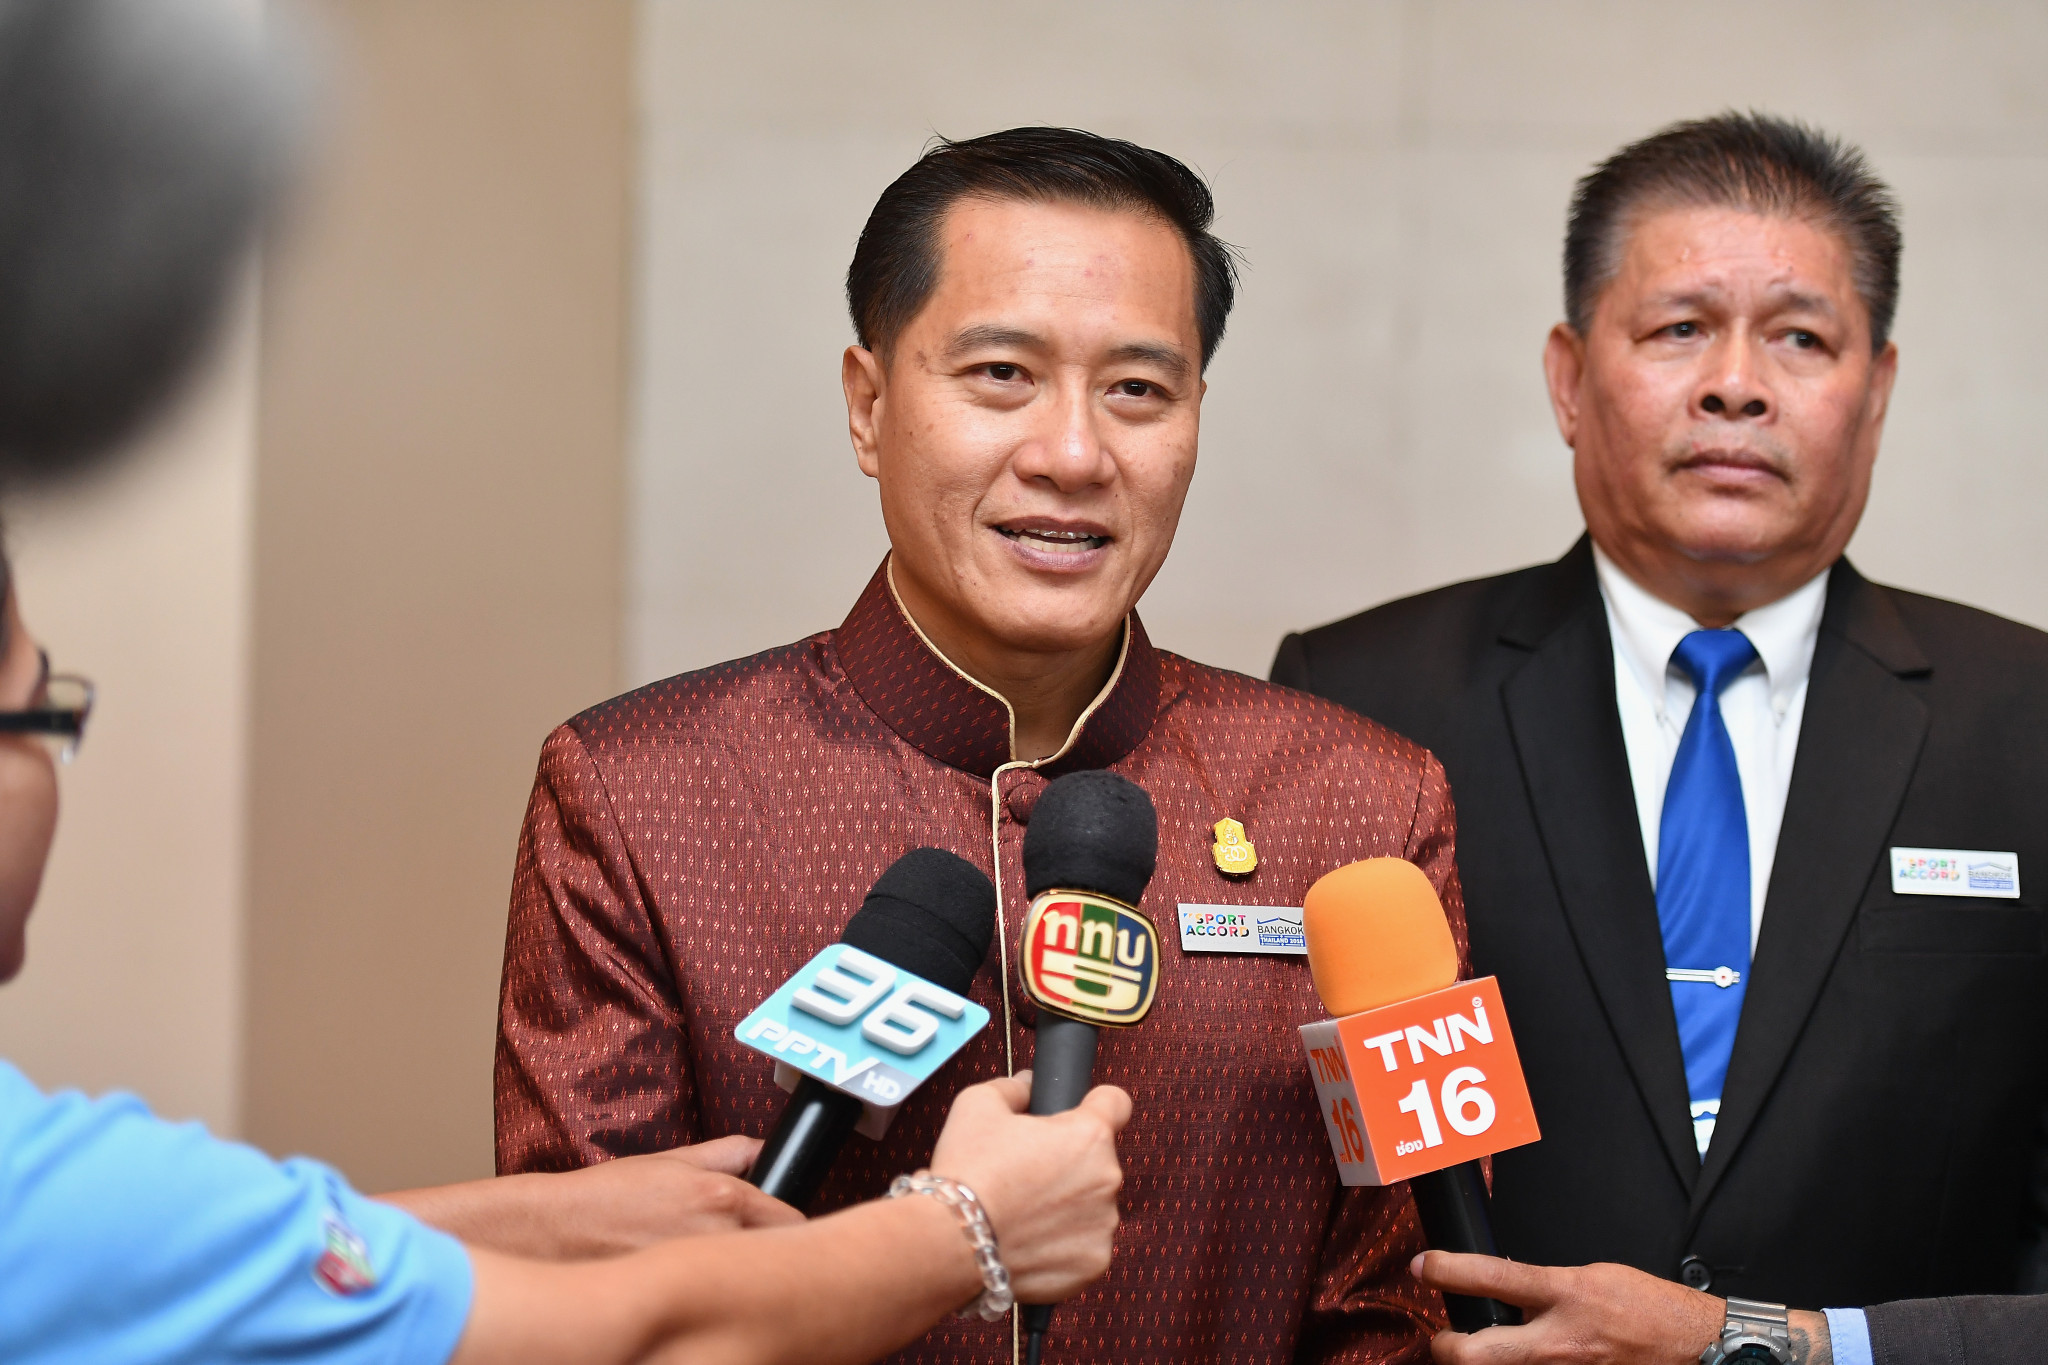 Thailand's Minister of Tourism and Sports, Weerasak Kowsurat, was among the people who Andrew Parsons met in Bangkok ©Getty Images